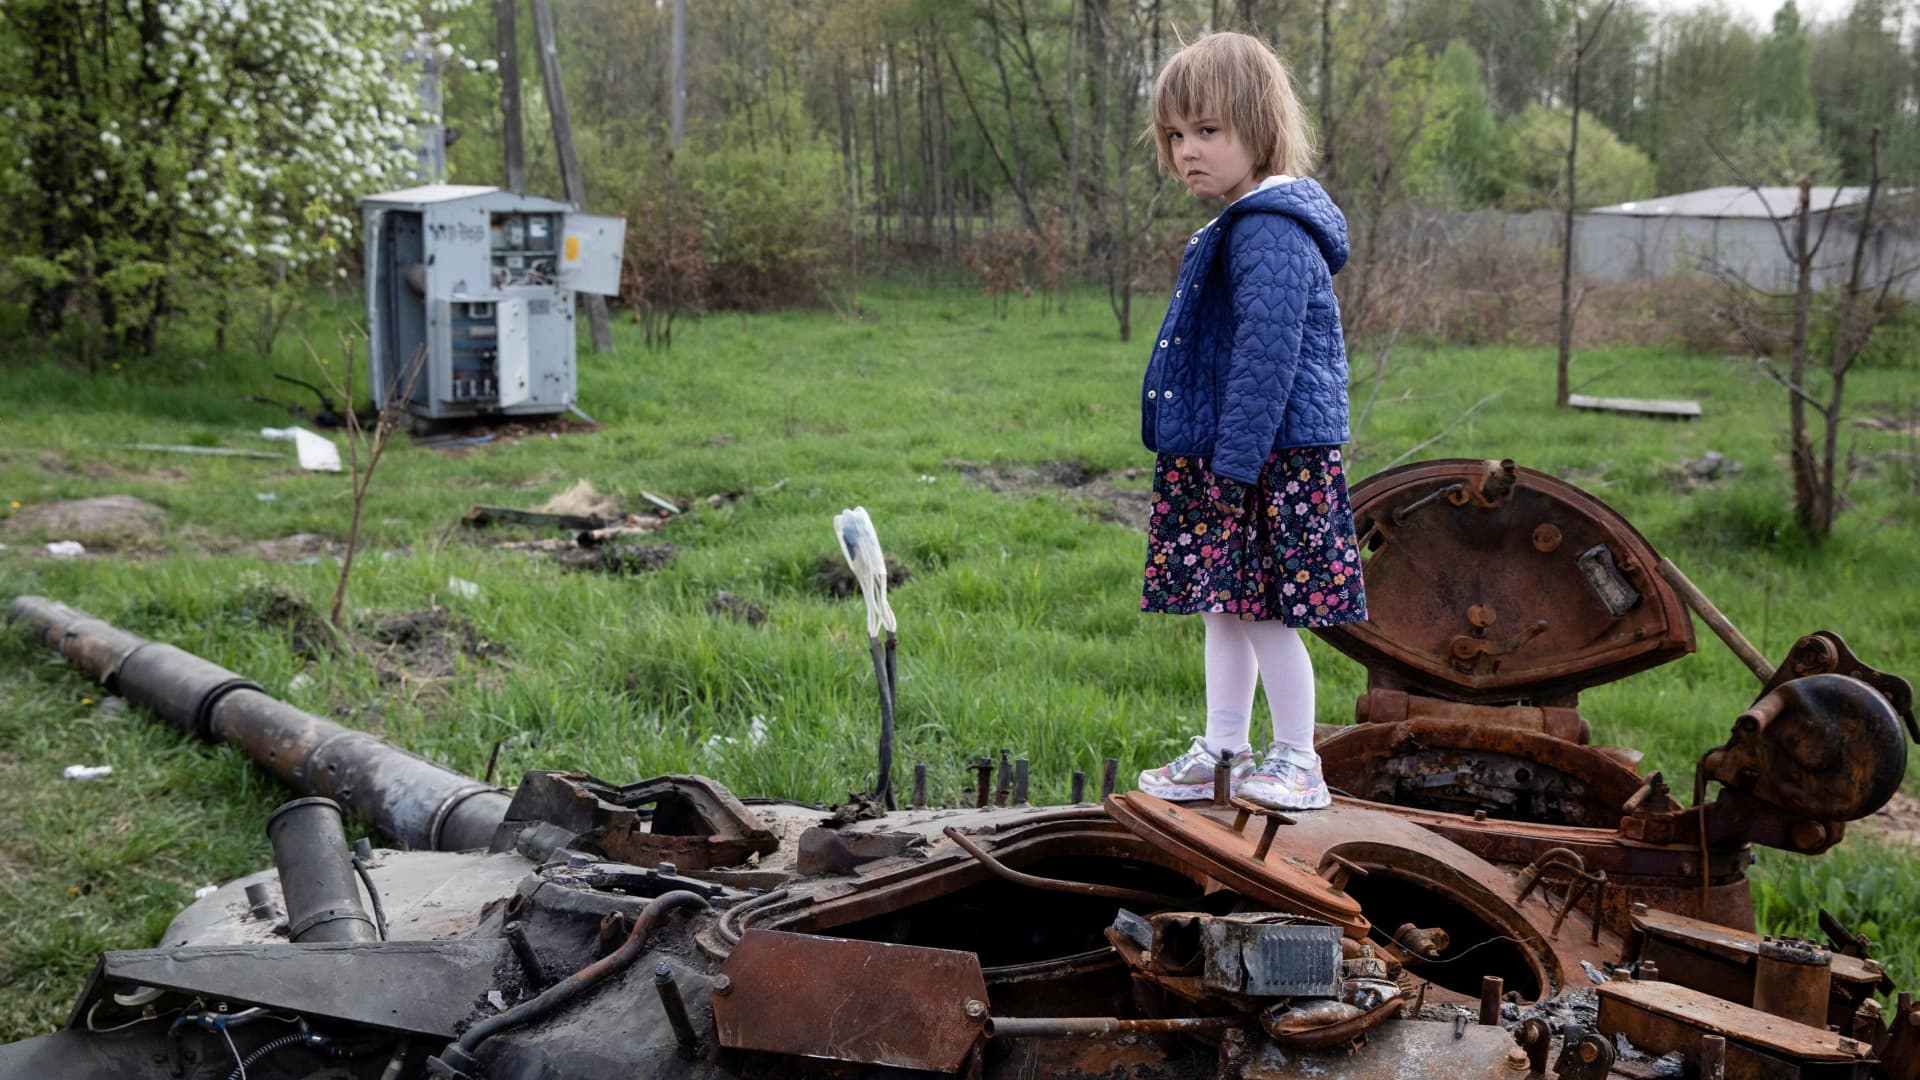 A child stands on a destroyed Russian tank, amid Russia's invasion of Ukraine, near Makariv, Kyiv region, Ukraine May 7, 2022.